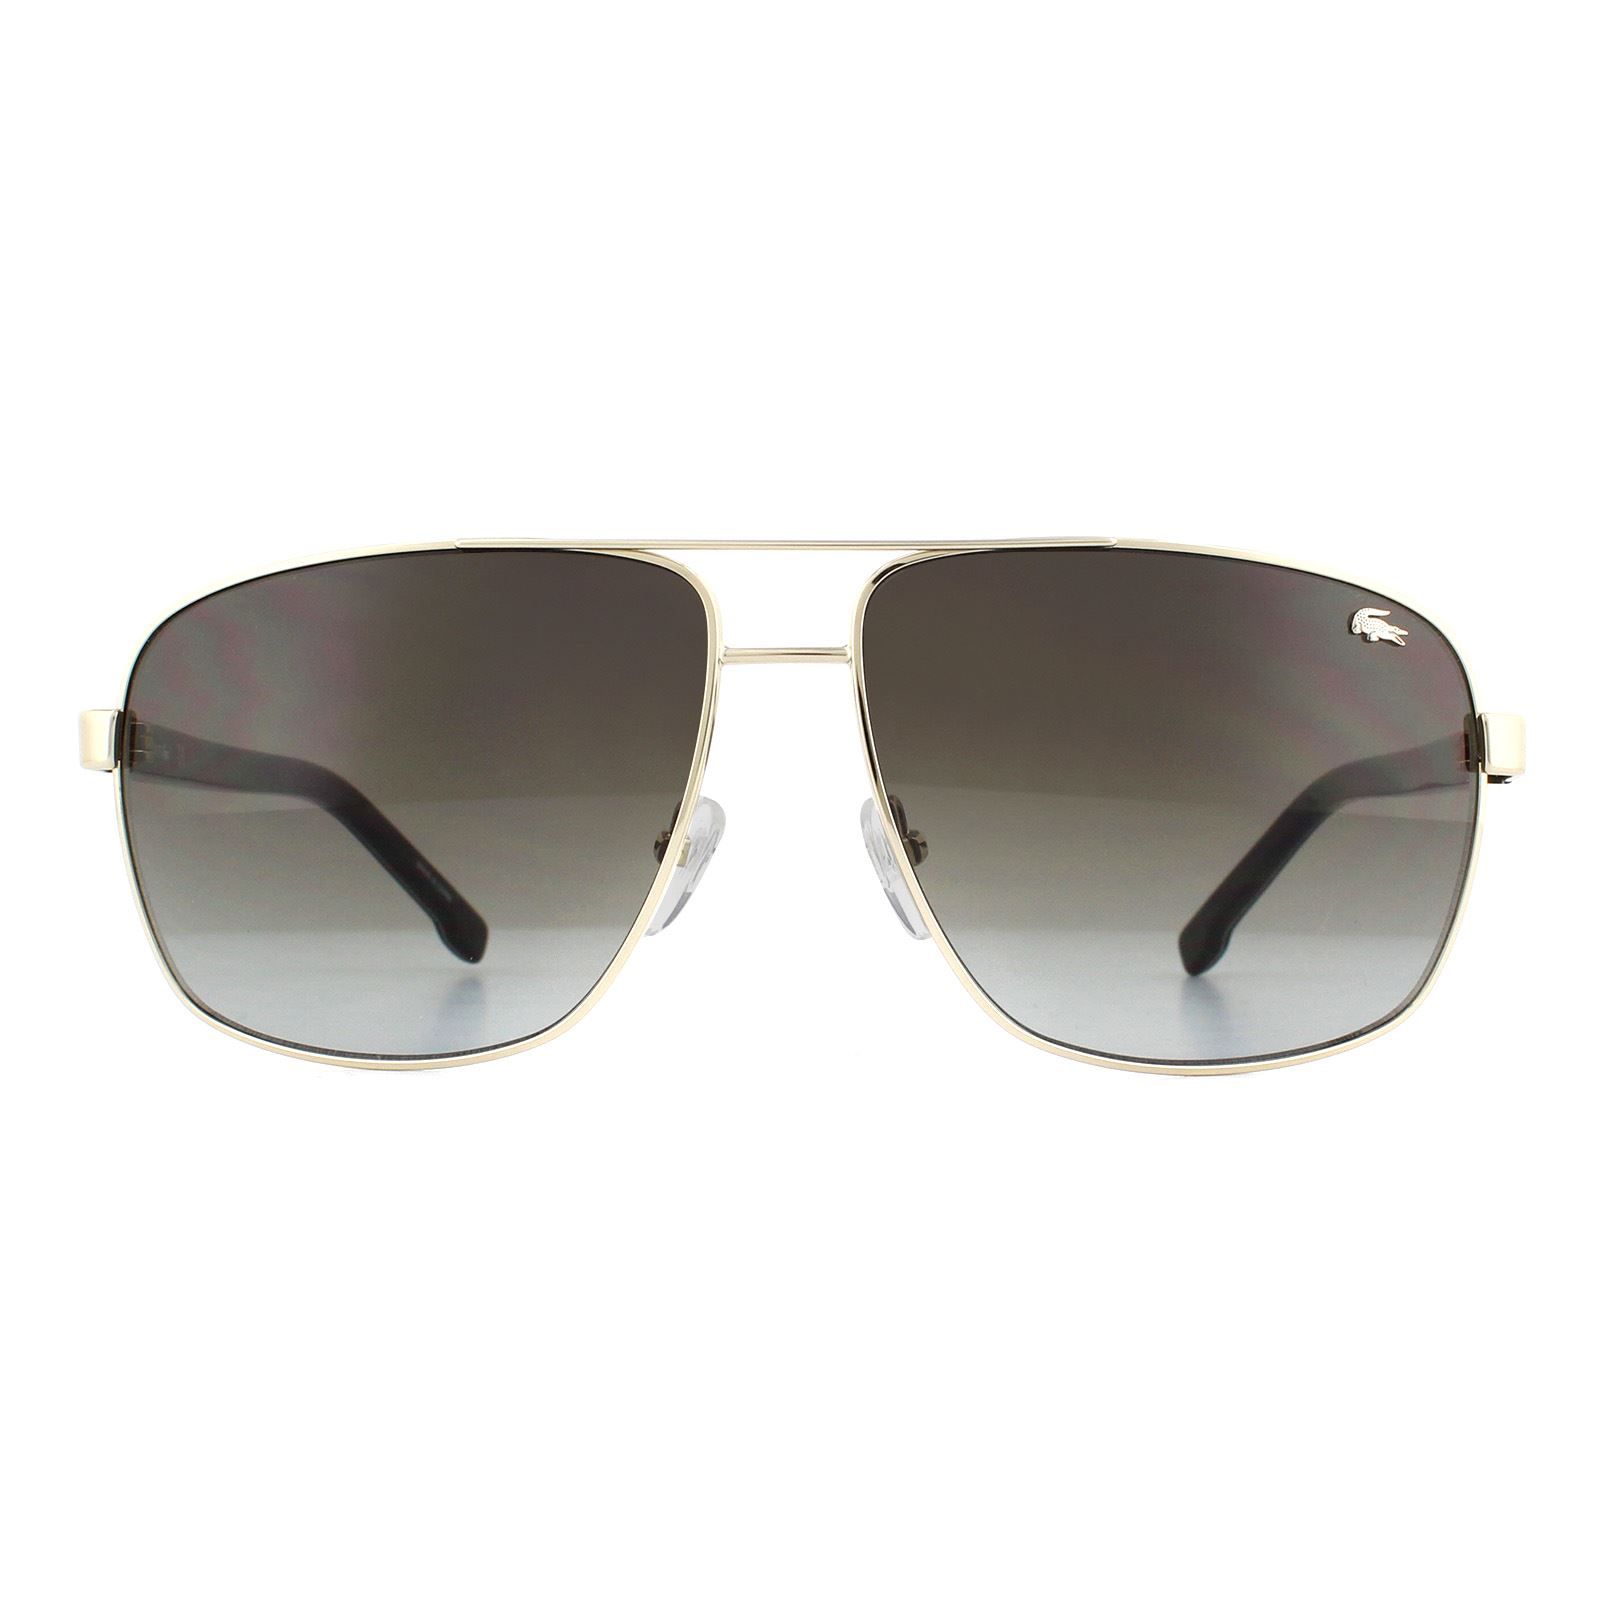 Lacoste Sunglasses L162S 714 Gold Brown Gradient are a large square aviator style for men with a metal frame front and plastic temples for added comfort. The iconic Lacoste alligator embellishes one lens corner, and the Lacoste text logo is also featured on each temple.